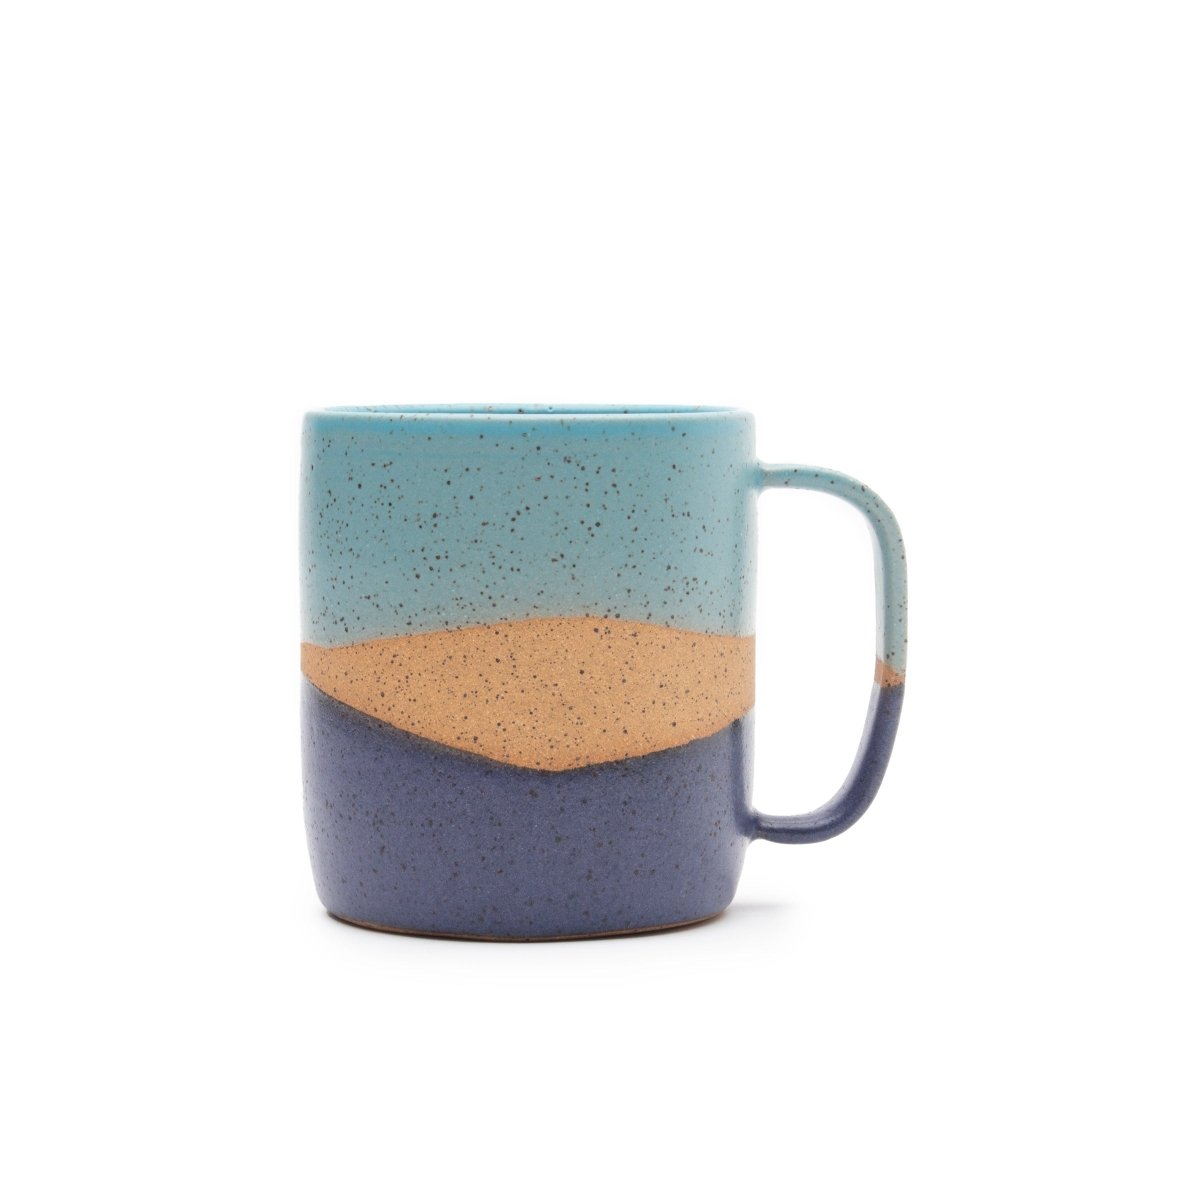 Handle Mug in Lapis and Sky Blue Stripes